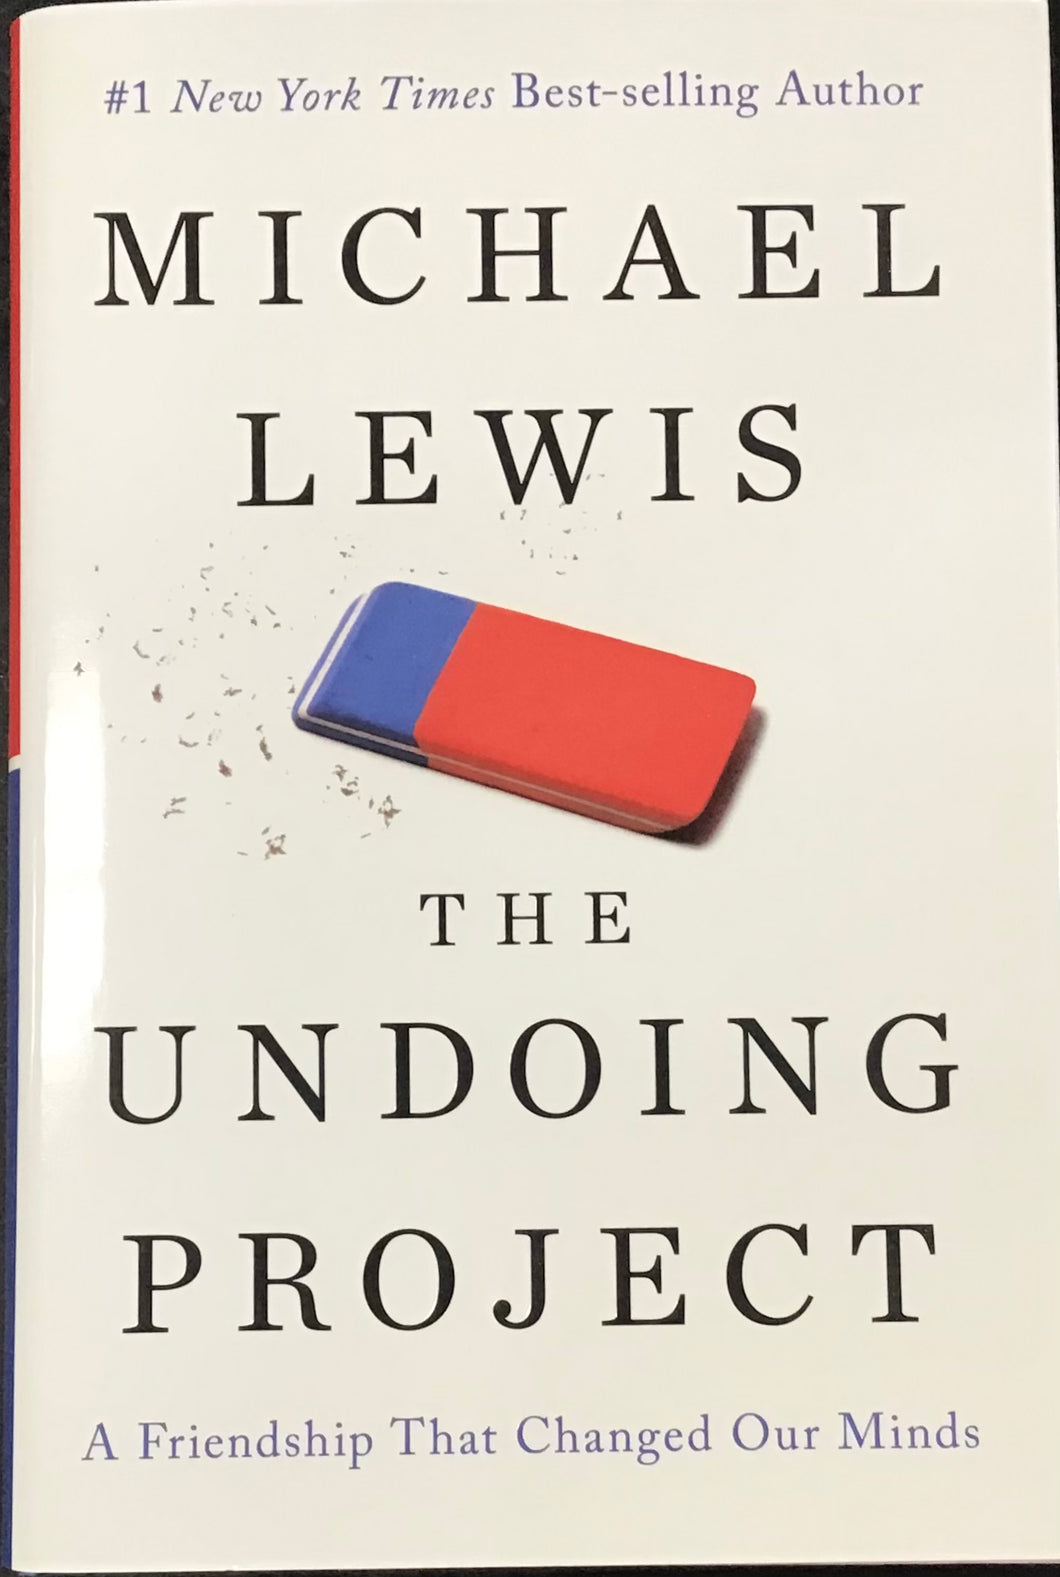 The Undoing Project, Michael Lewis